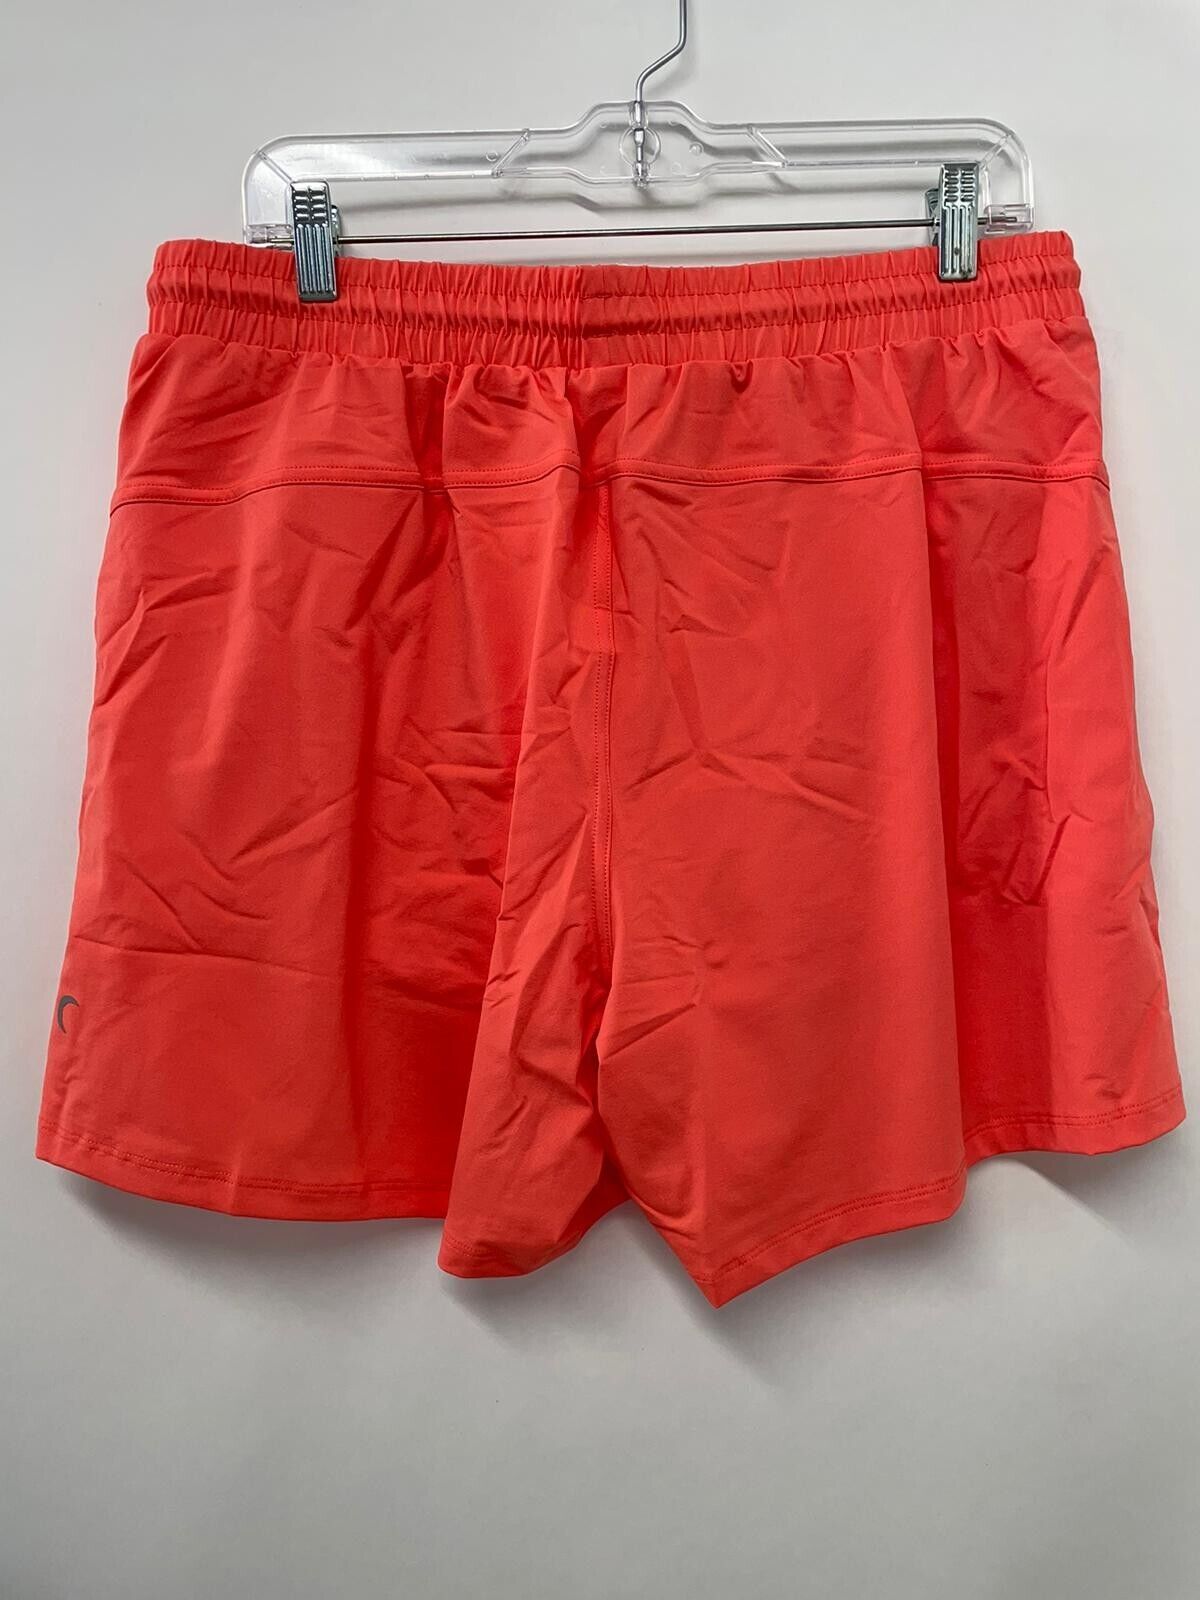 Zyia Active Womens XXL Bay Shorts Pull On Electric Coral Orange Lined Athletic